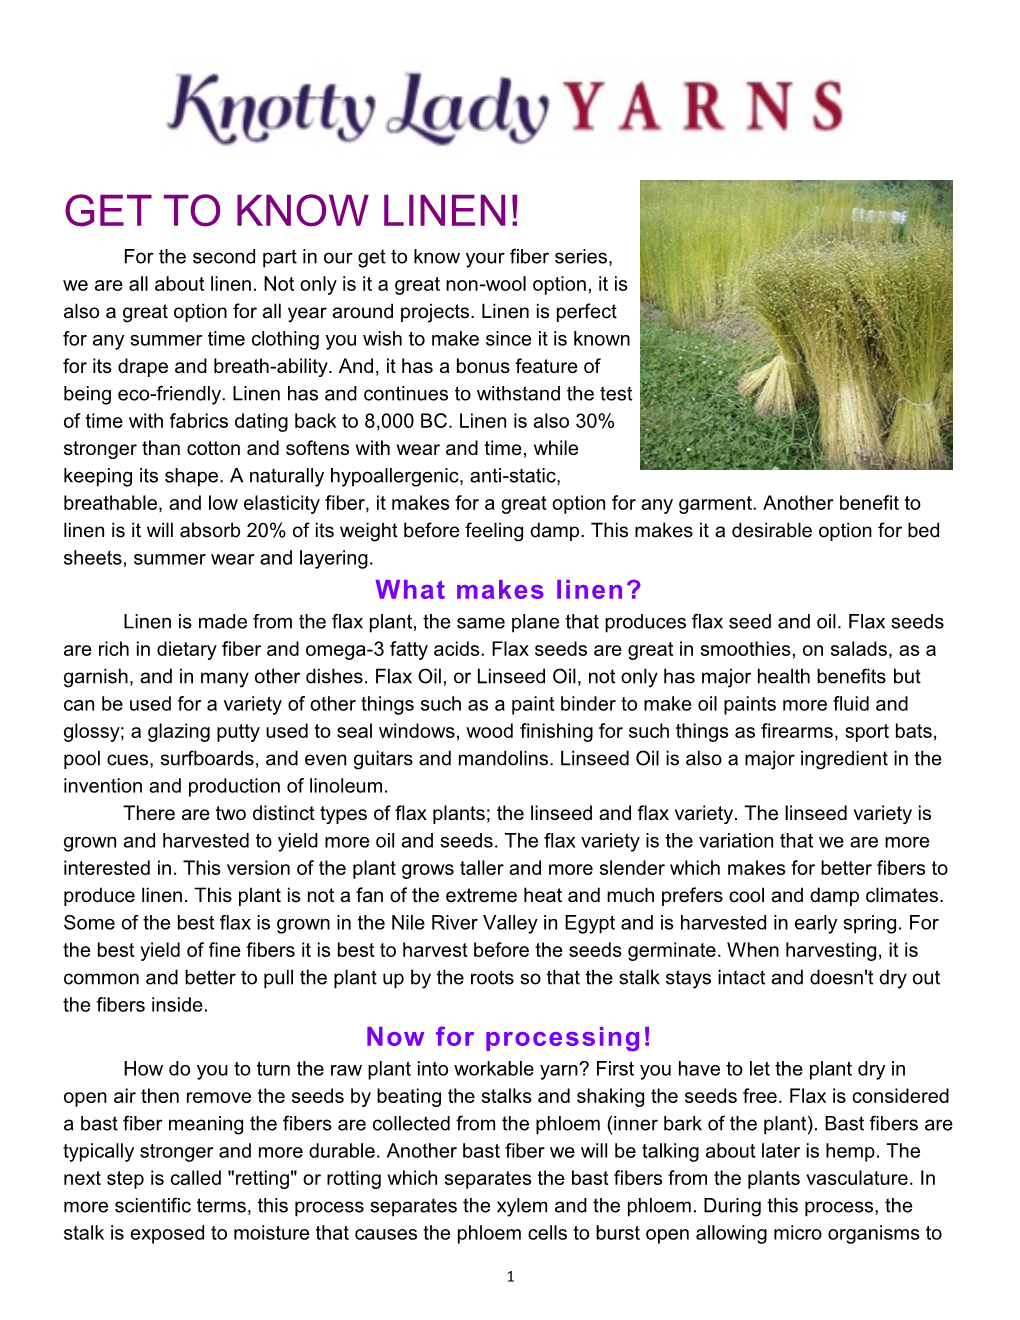 GET to KNOW LINEN! for the Second Part in Our Get to Know Your Fiber Series, We Are All About Linen